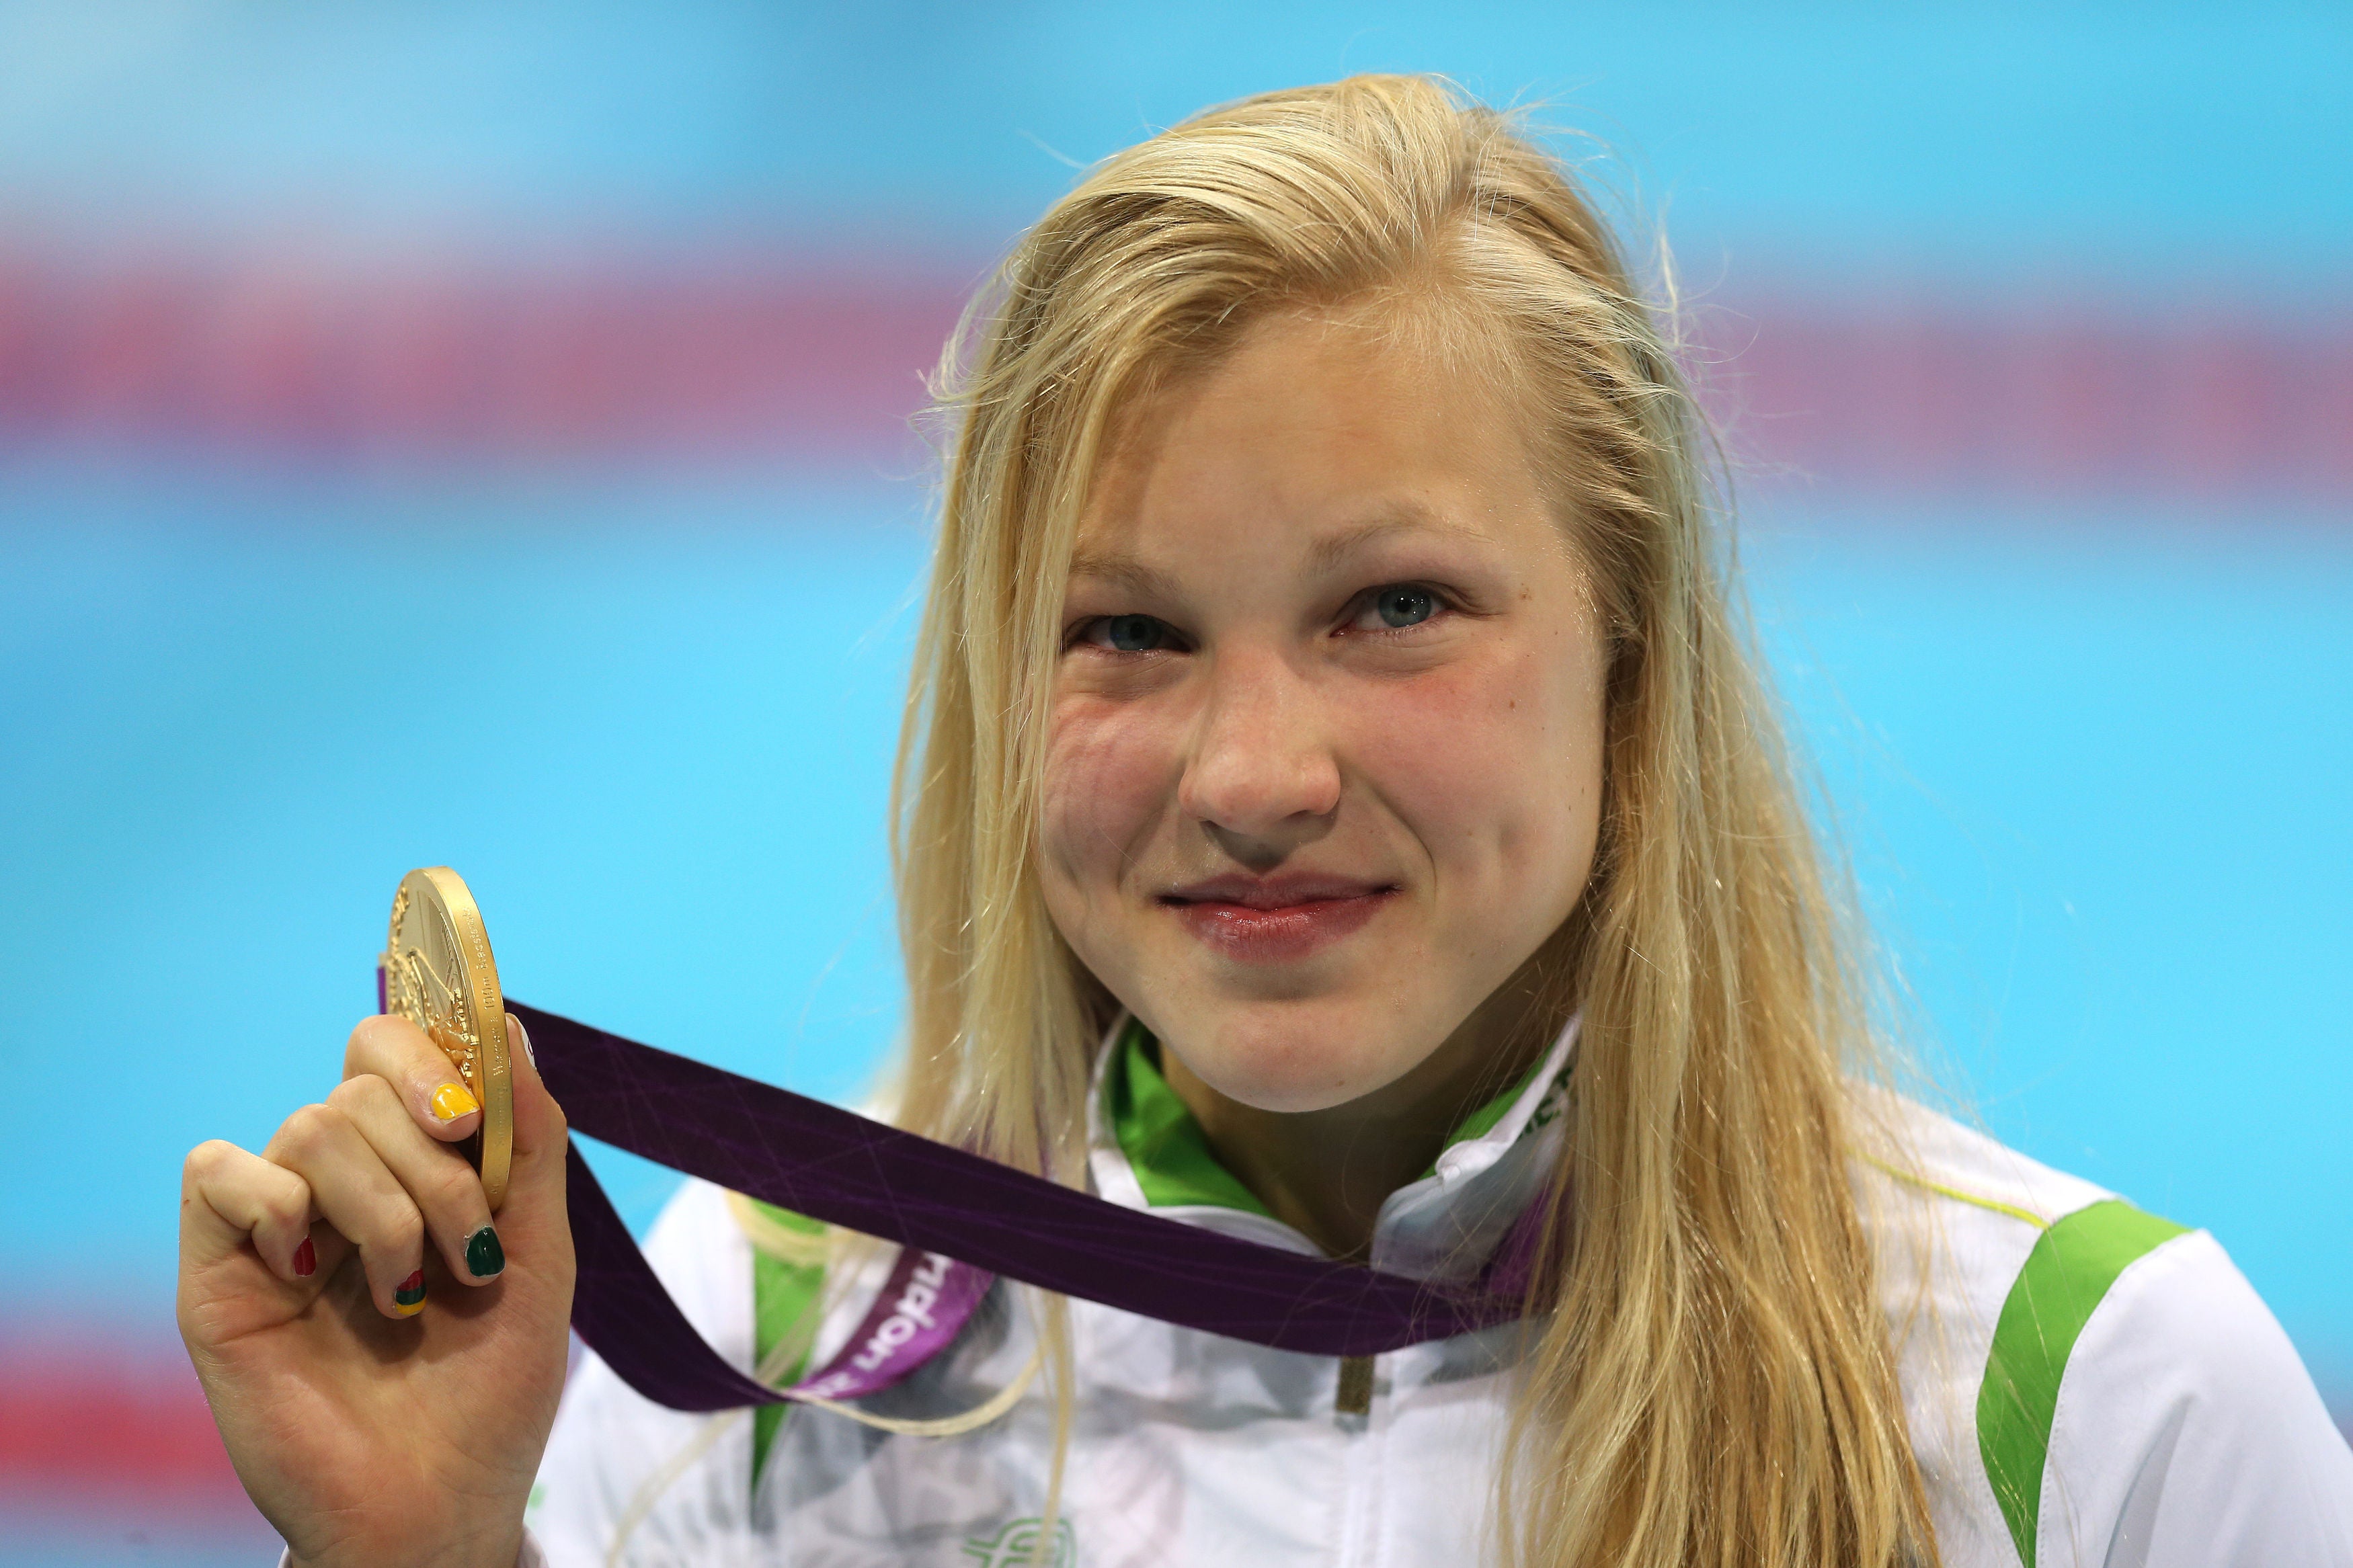 Little-known 15-year-old Ruta Meilutyte from Lithuania won gold in the 100m breaststroke (Mike Egerton/PA)